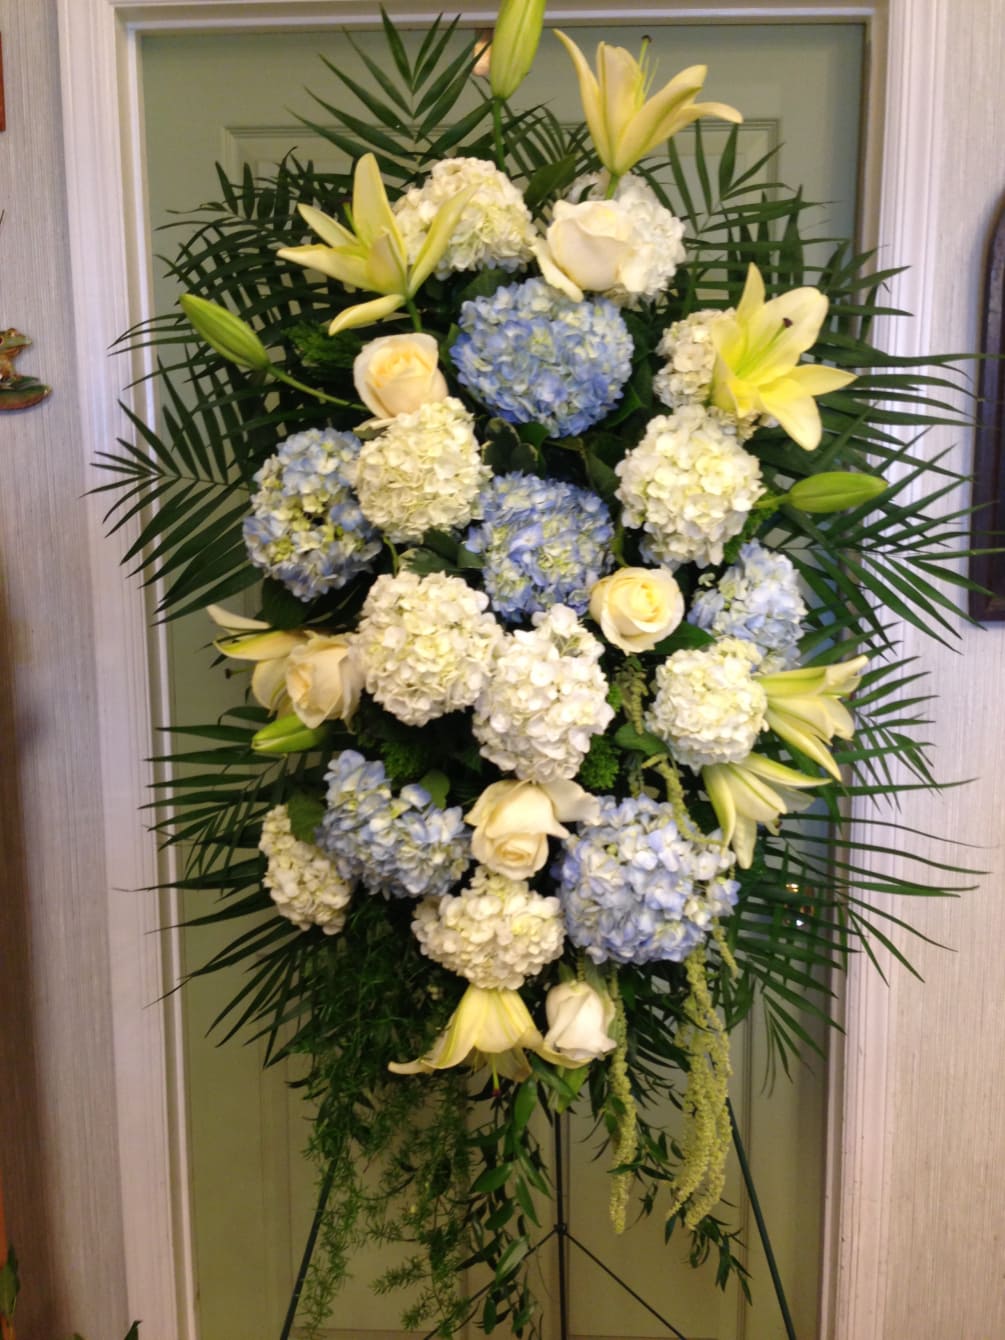 Blue/White Hydrangea, Hybrid Lilies, White Roses, Fancy Assorted Greens